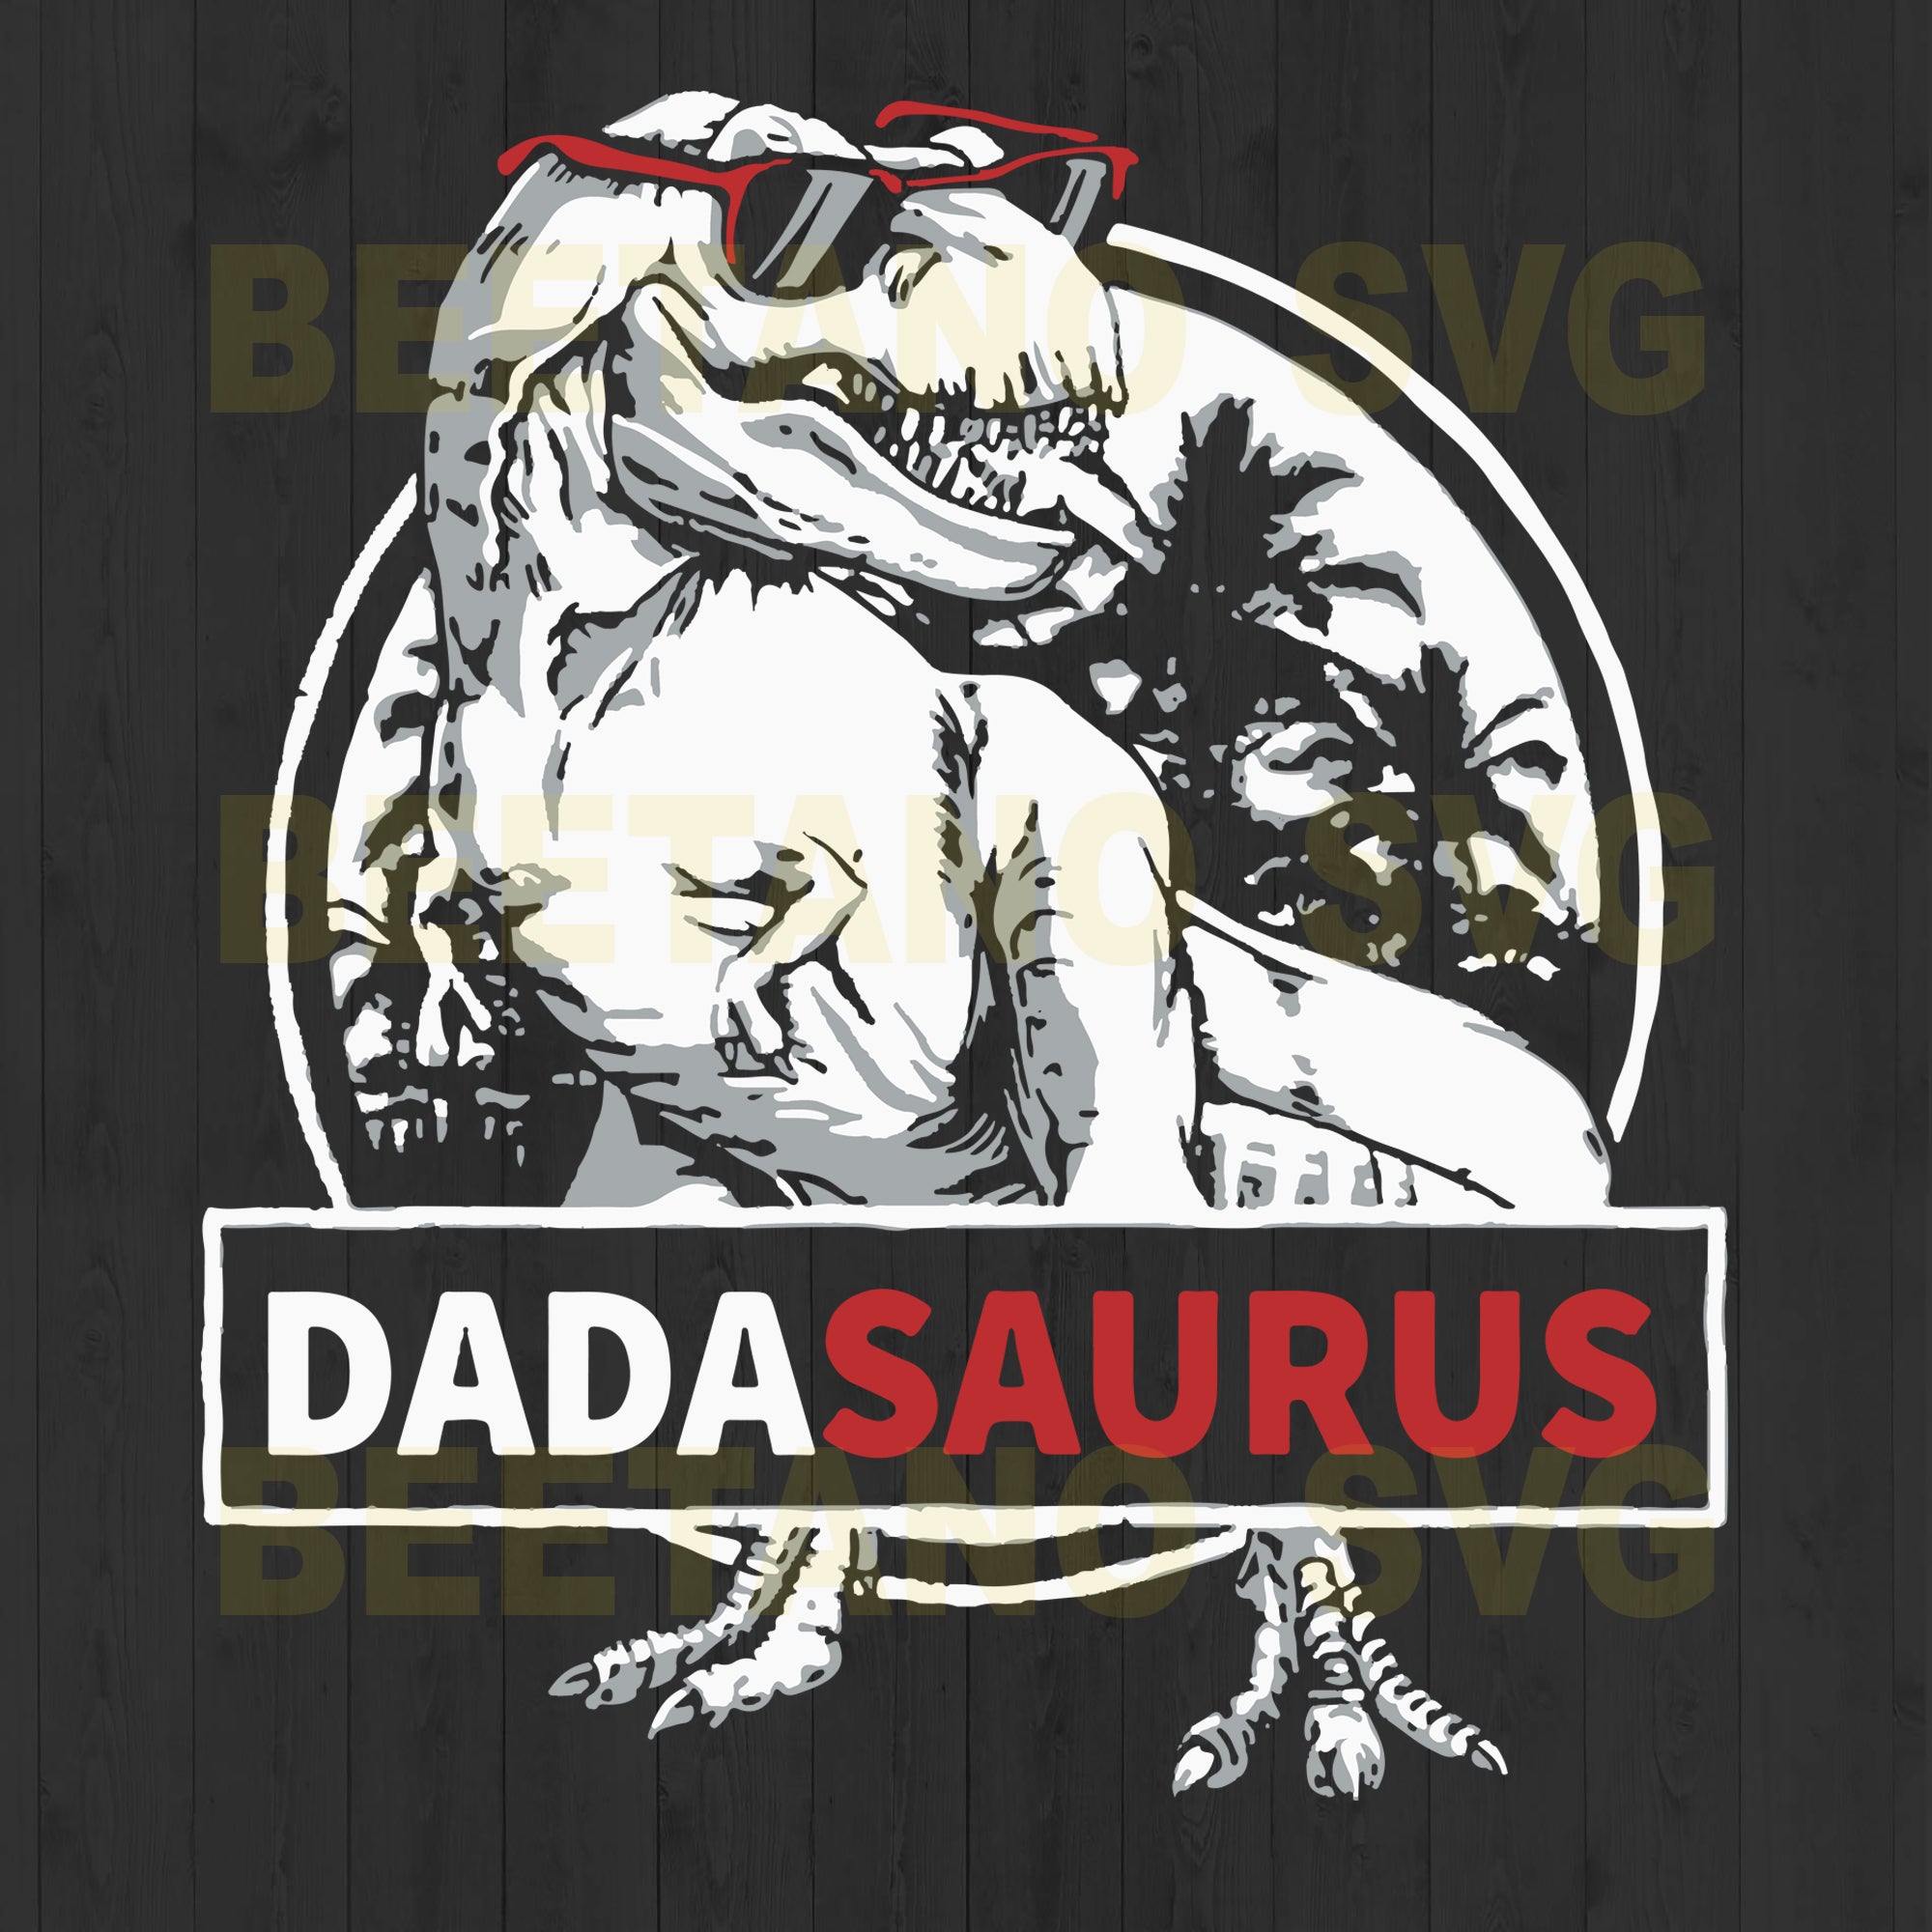 Download Dadasaurus High Quality Svg Cut Files Best For Unique Craft